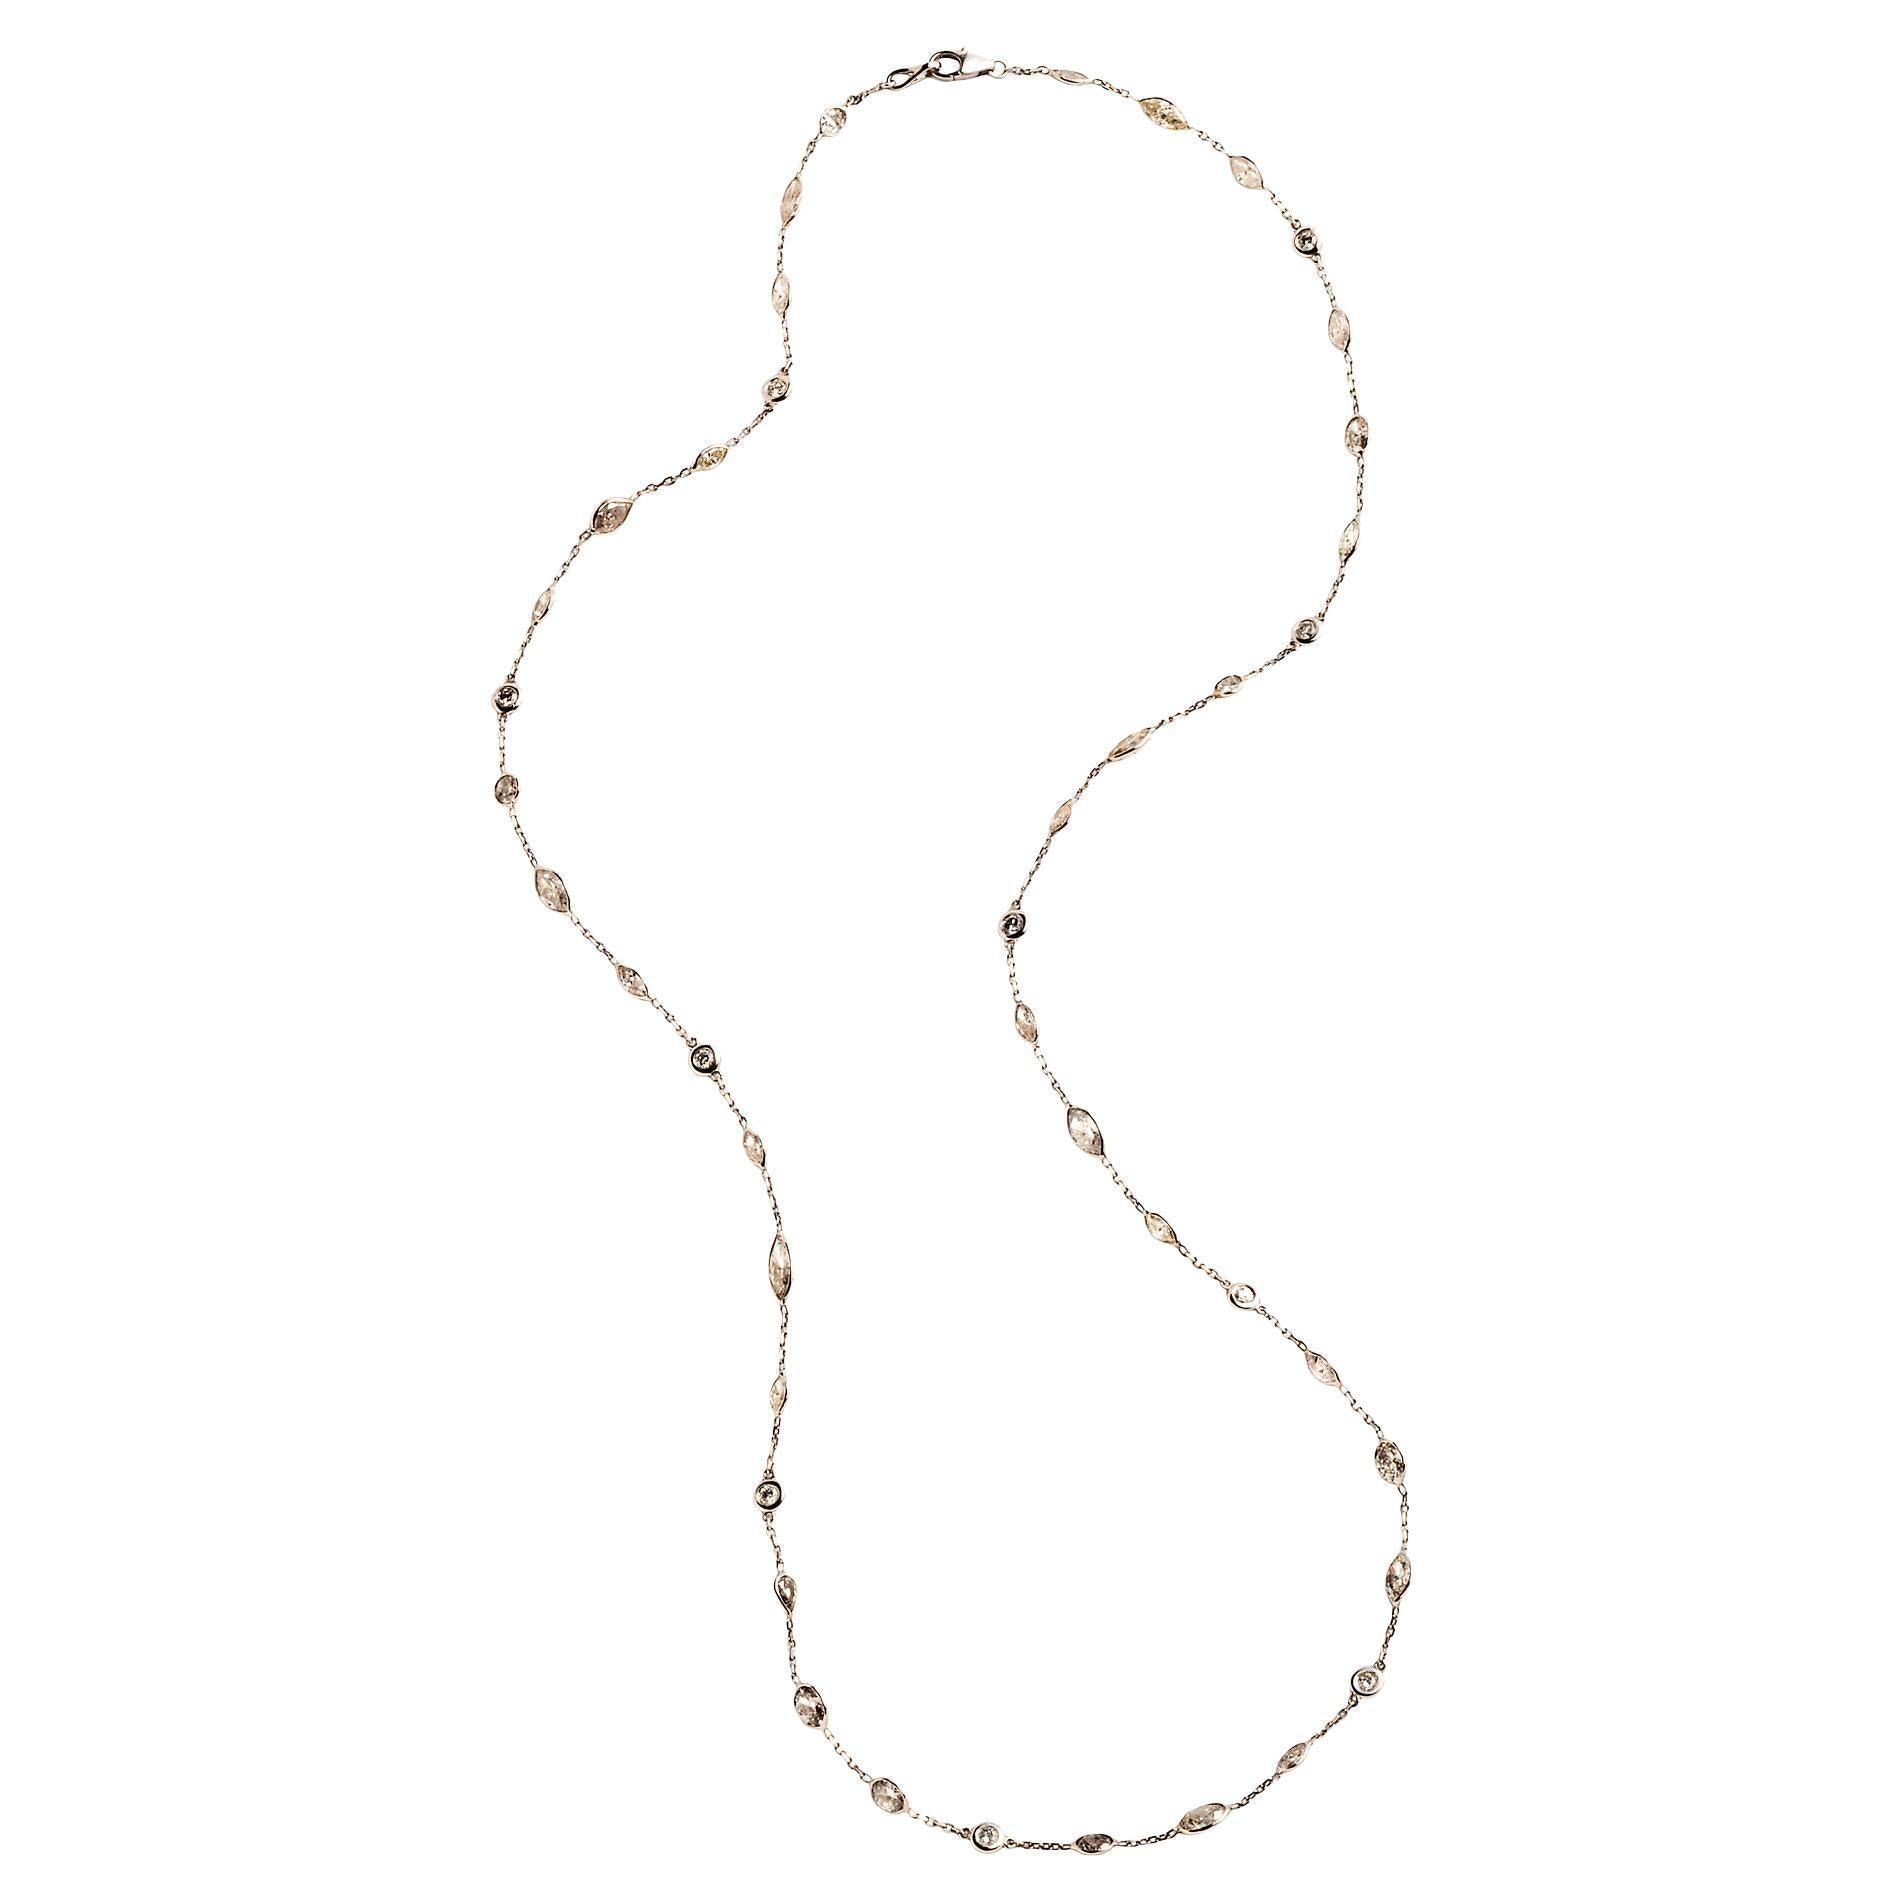 This delicate 14k white gold neck chain is set with approximately 10 carats of alternating round, oval, marquise and pear-shaped diamonds. The diamond facets catch the light as the necklace moves on the body.

25” in length 
43 diamonds weighing